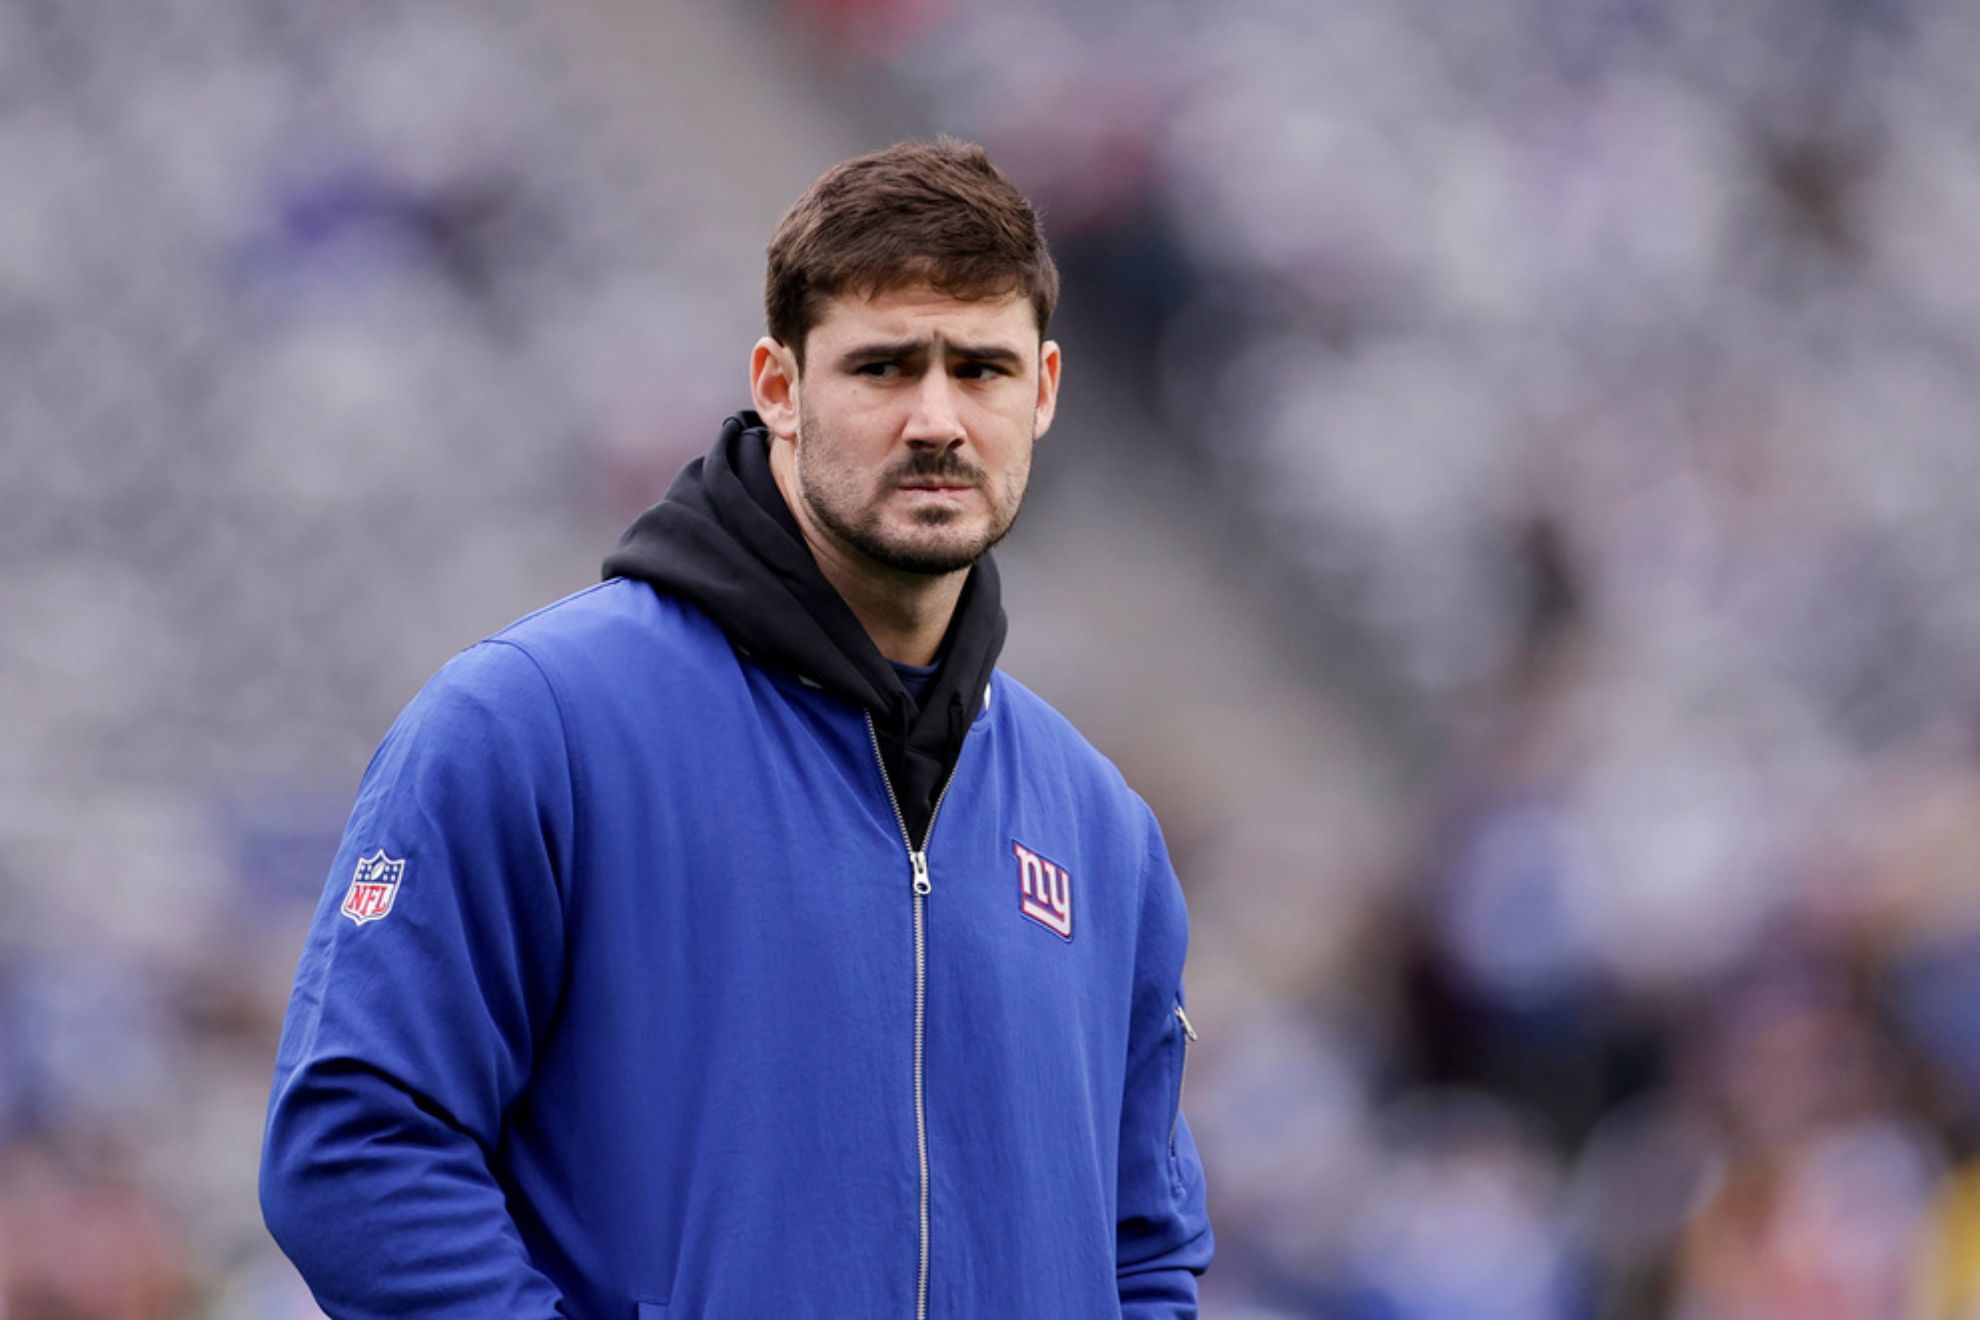 Daniel Jones: New York Giants 'Absolutely Done' With QB, per Rich